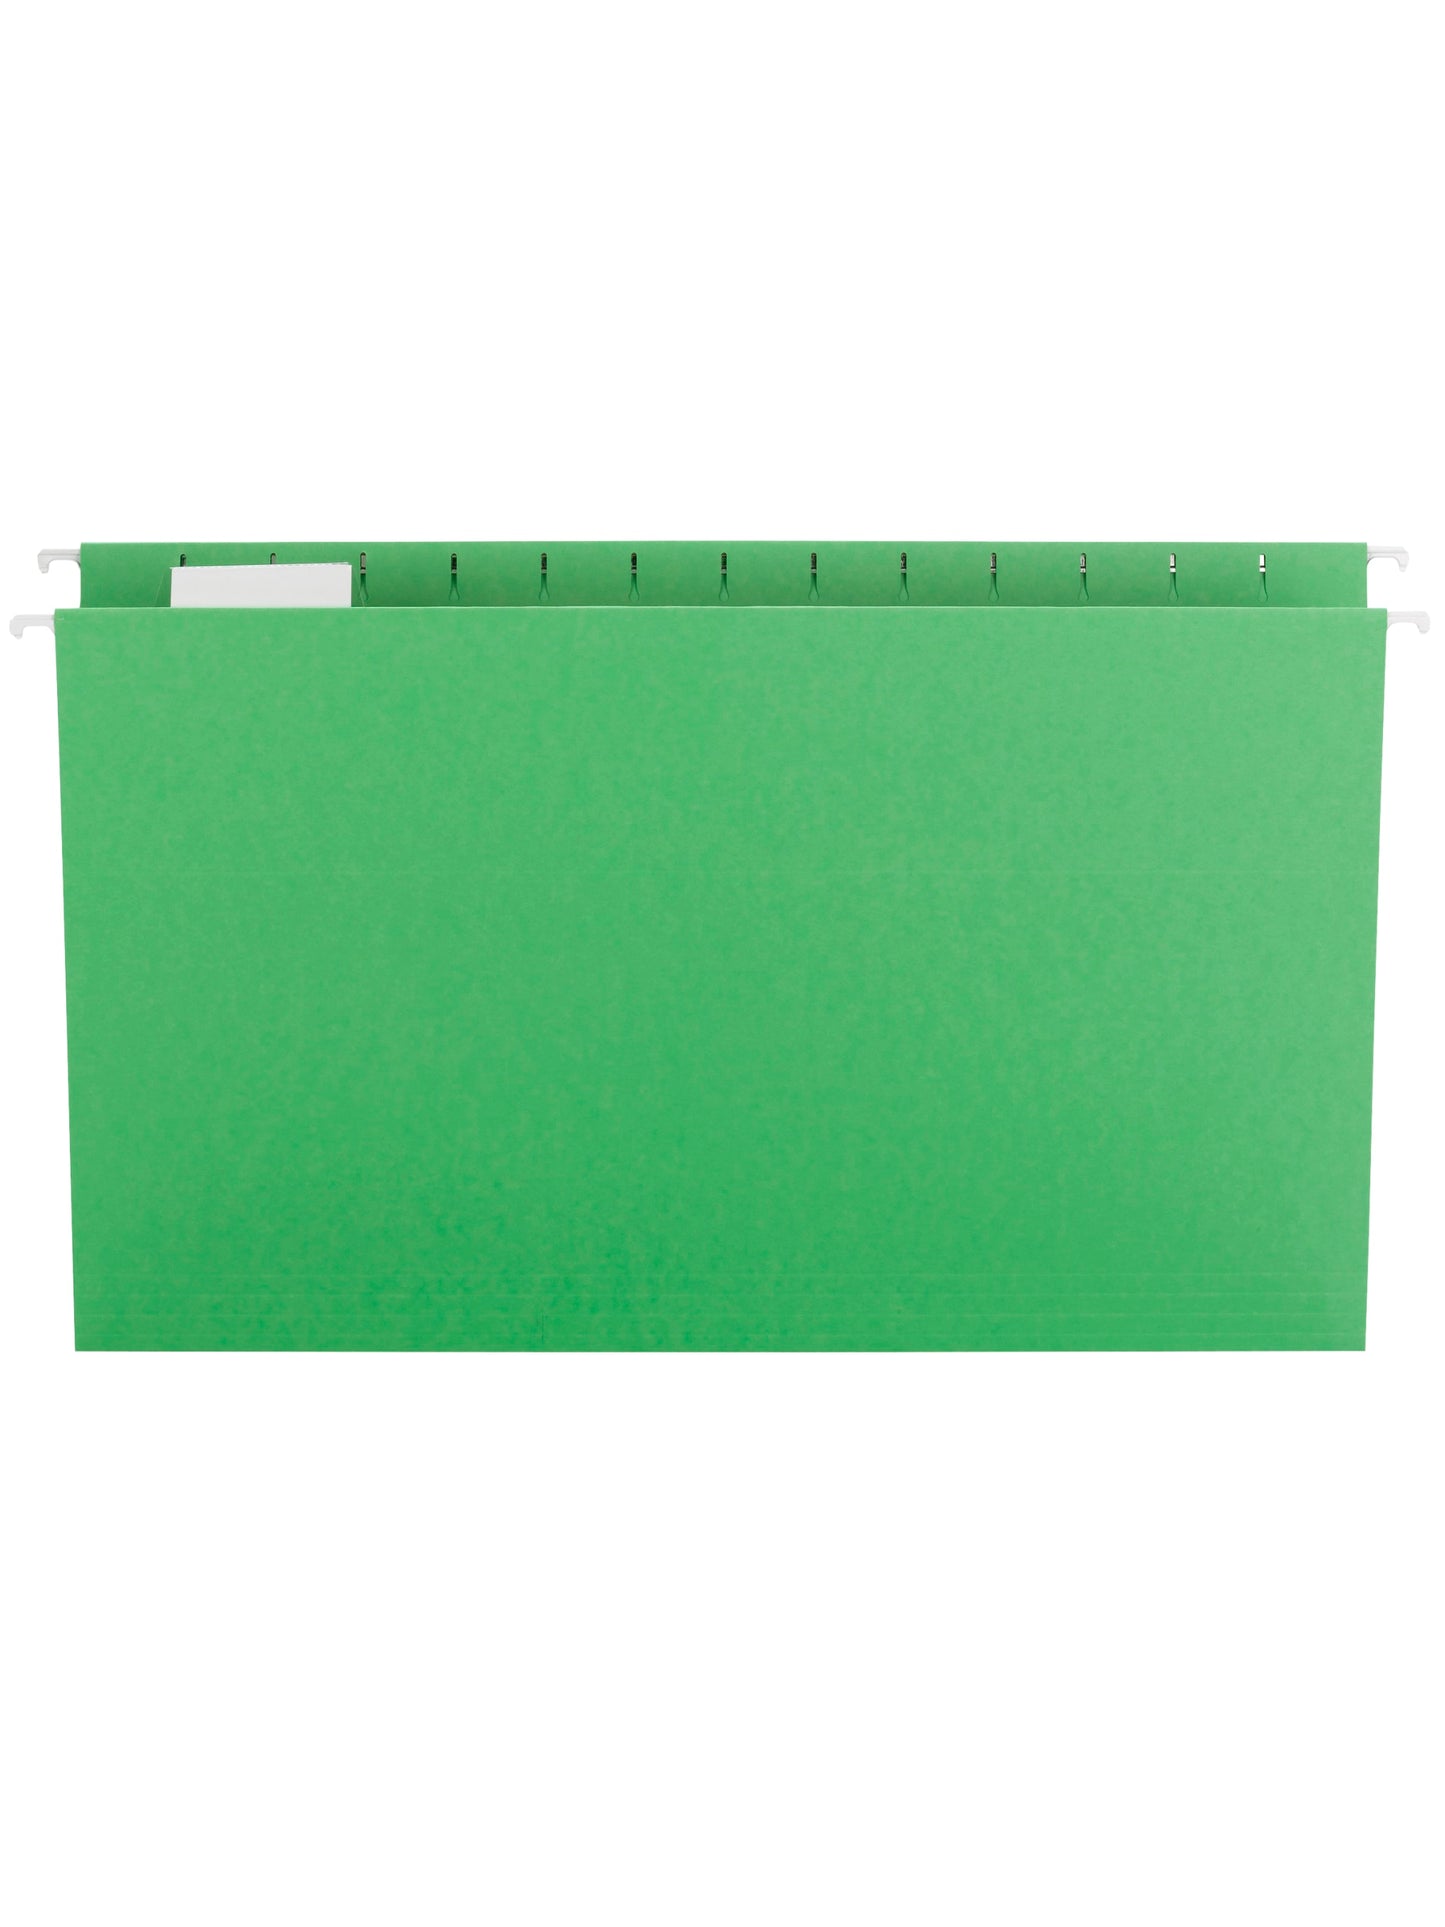 Standard Hanging File Folders with 1/5-Cut Tabs, Green Color, Legal Size, Set of 25, 086486641616